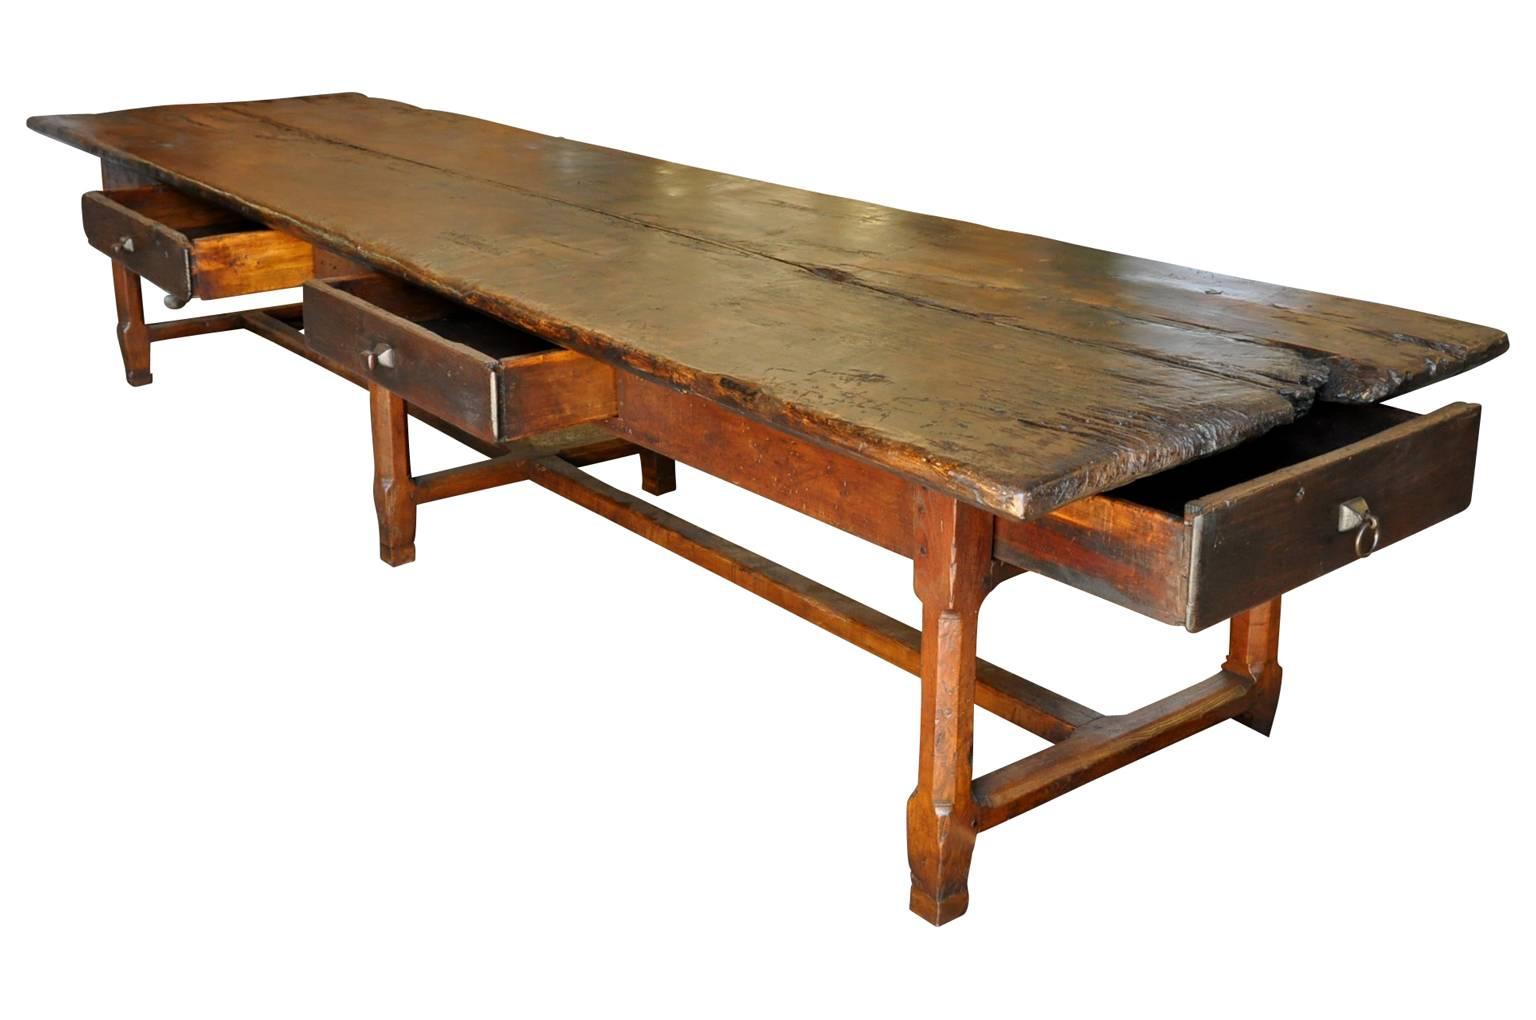 A monumental farm table from the South of France. Handsomely constructed from beautifully patina'd oak and chestnut with four drawers. A tremendous piece for very large family gatherings, a sensational island - or an exceptional store display piece.